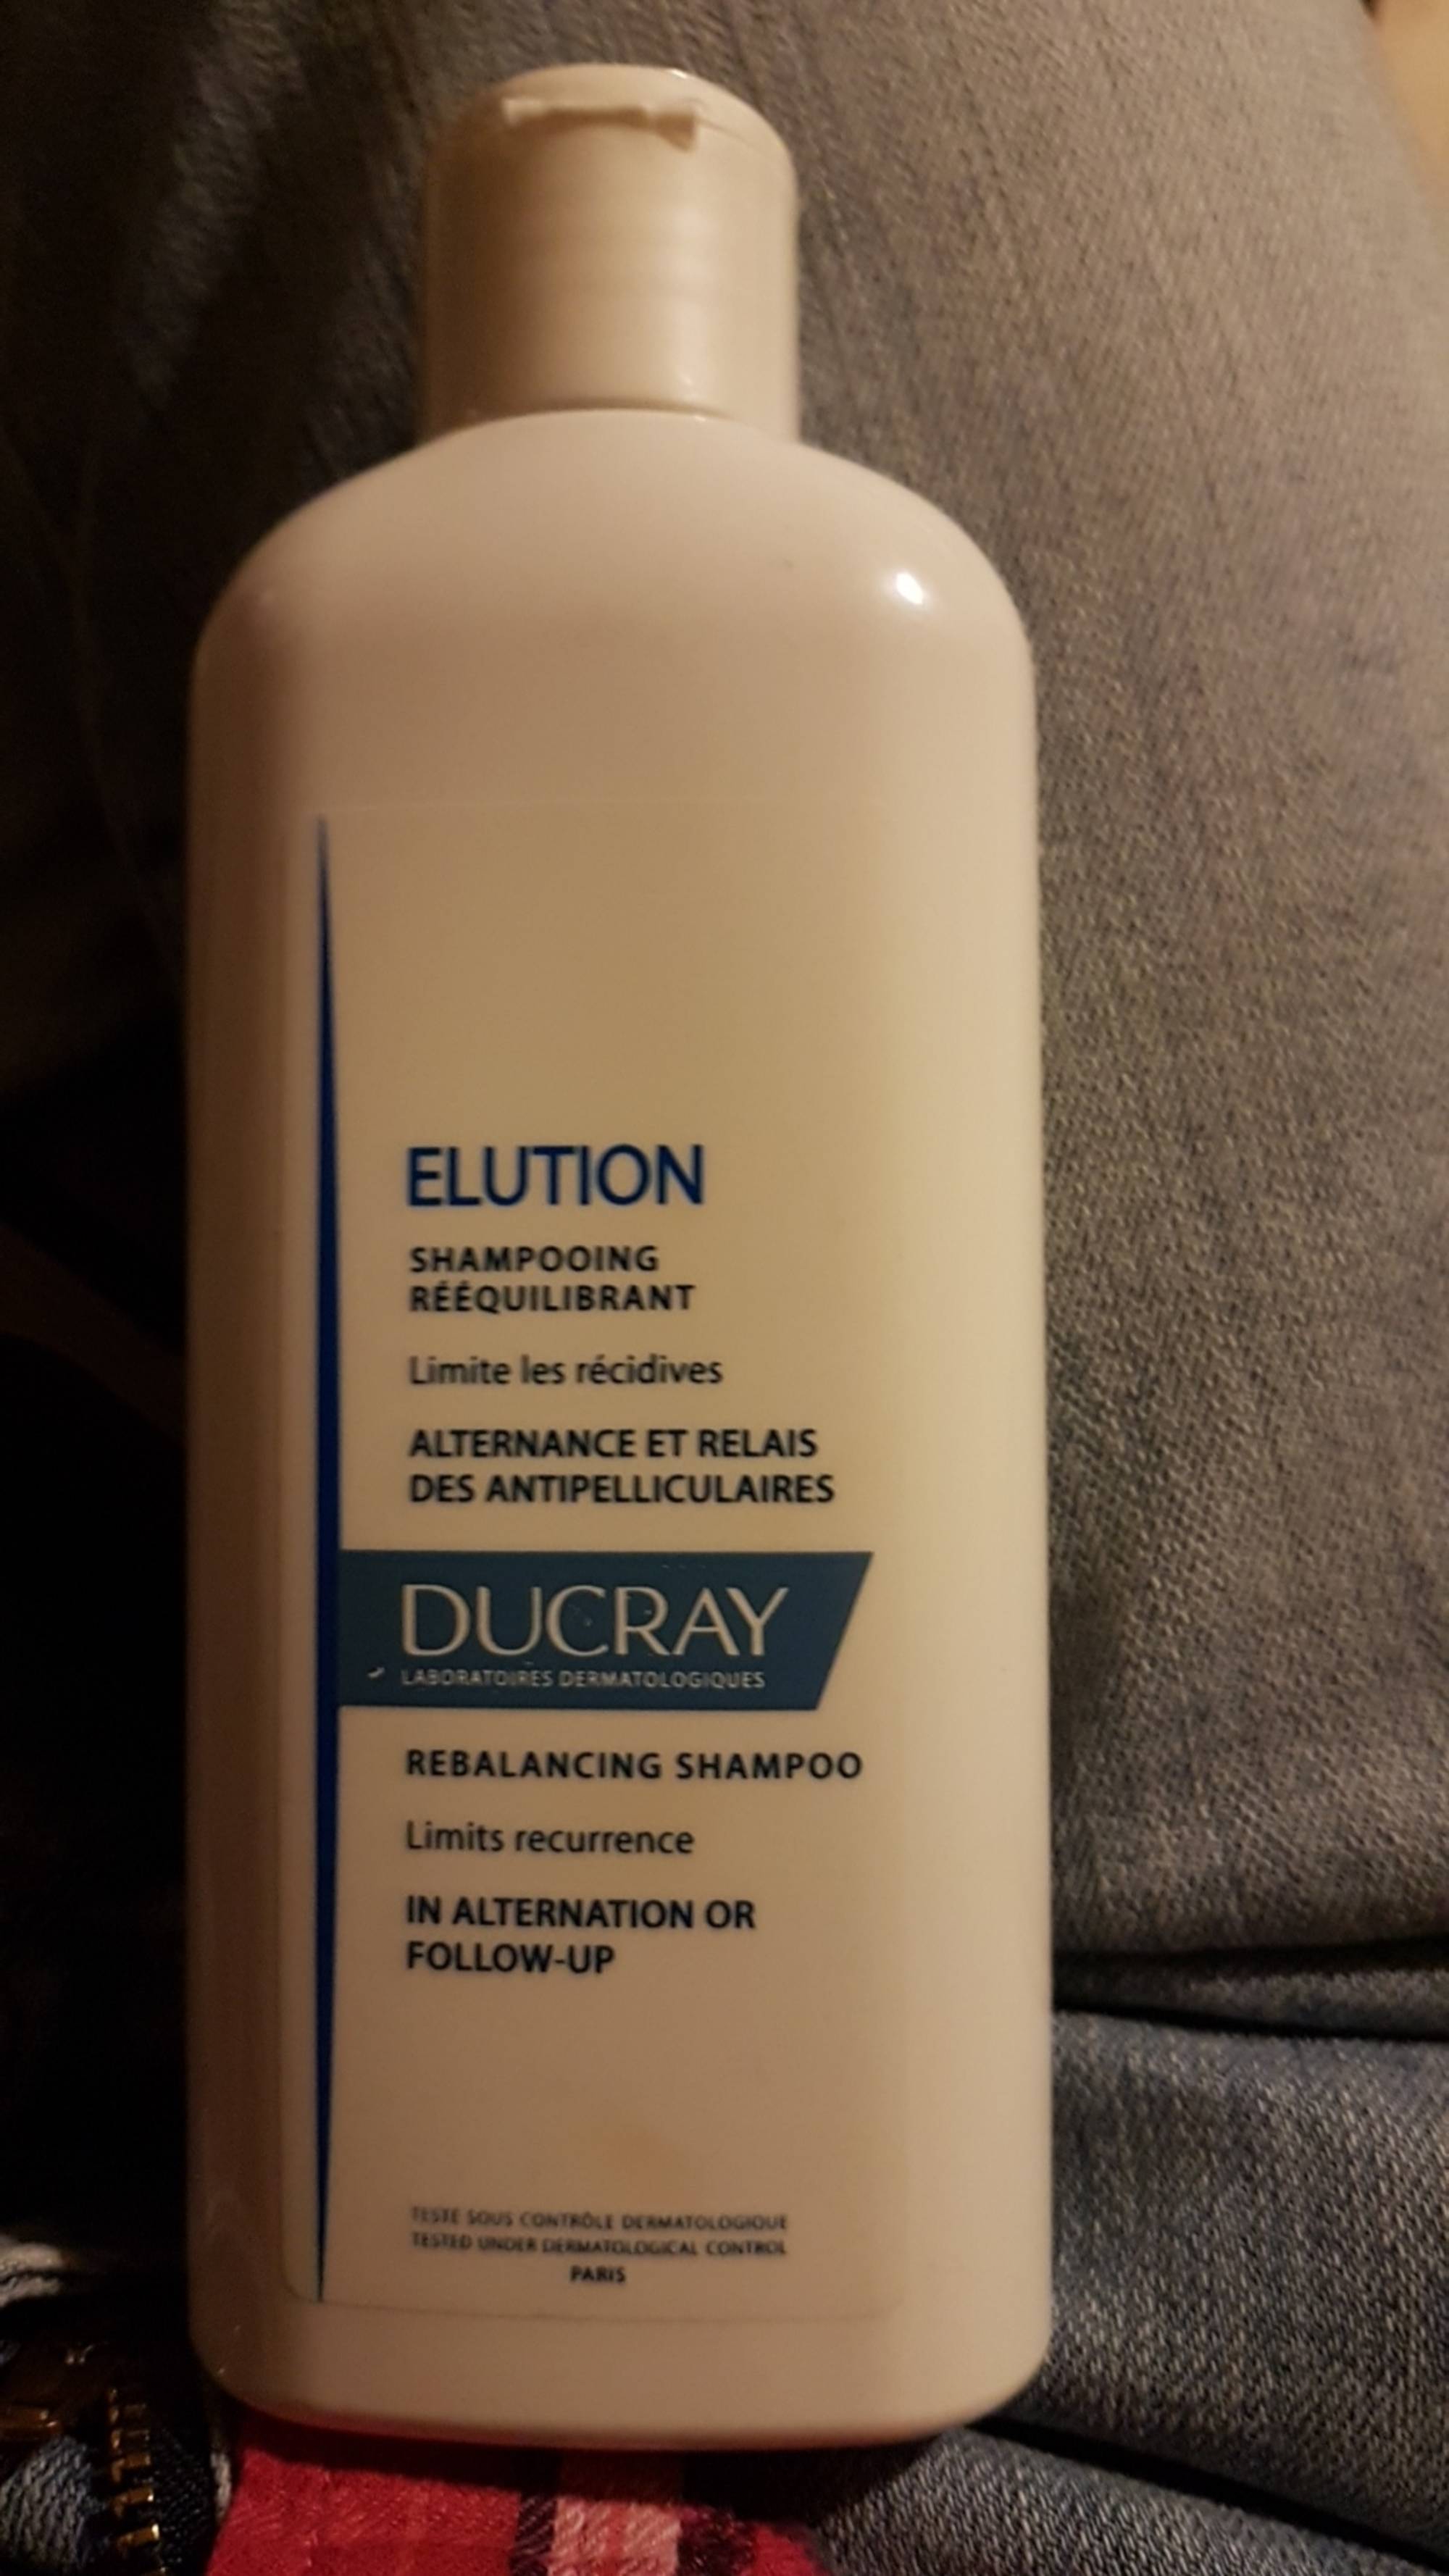 DUCRAY - Elution - Shampooing rééquilibrant